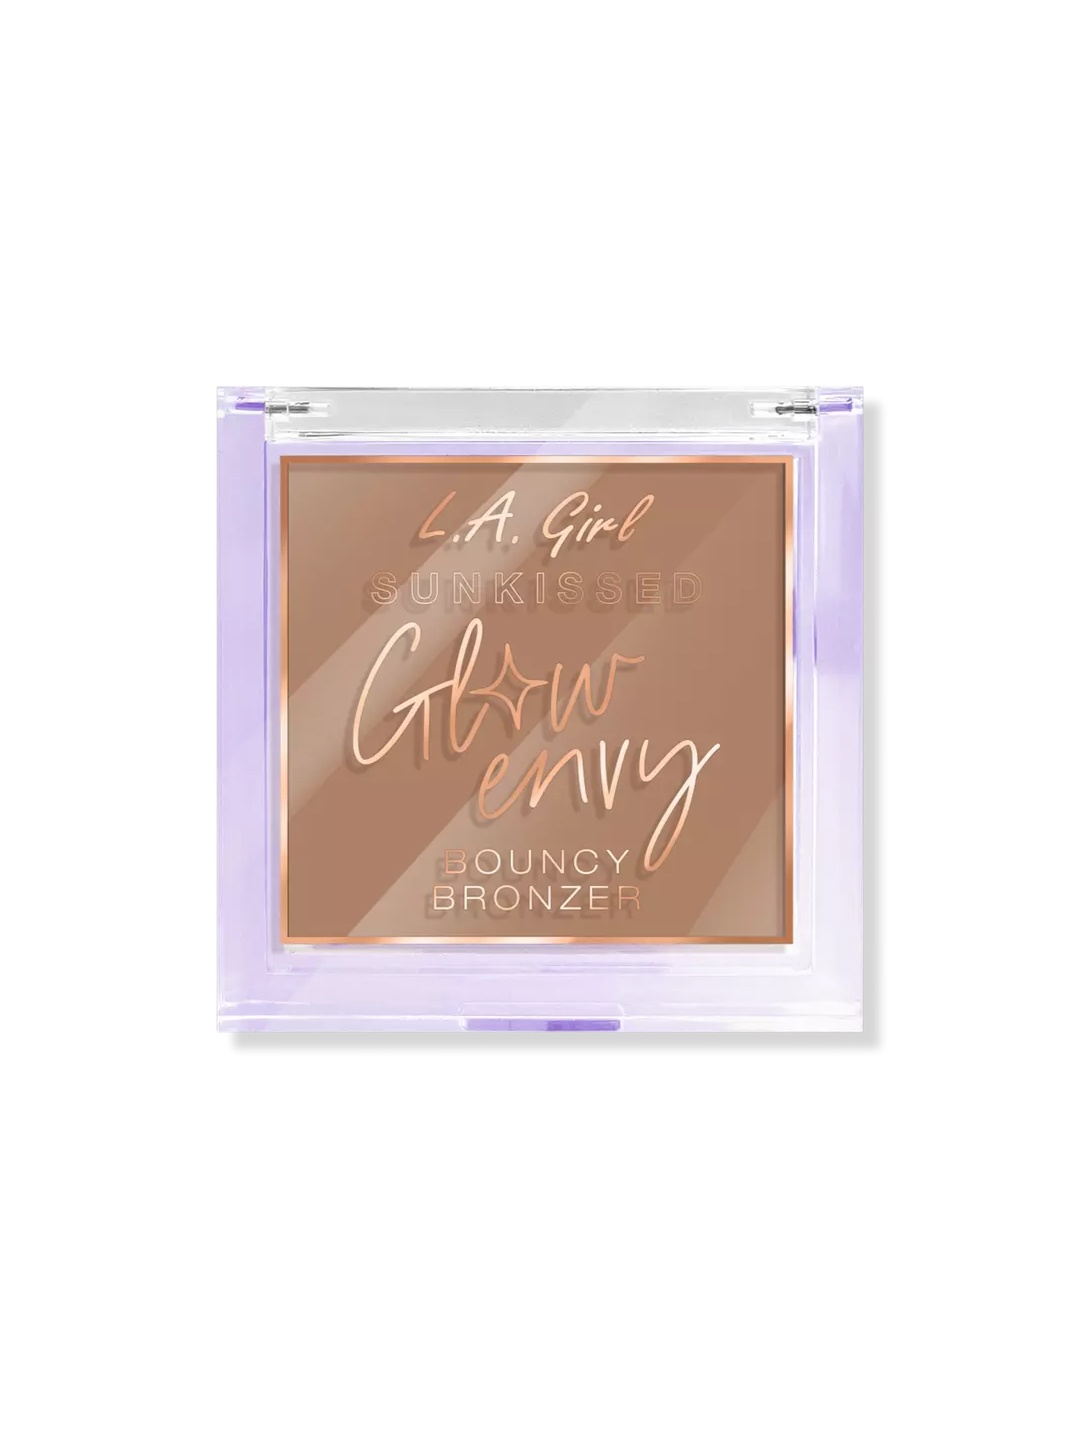 

L.A Girl Glow Envy Bouncy Bronzer 8 g - Sunkissed Glow, Brown